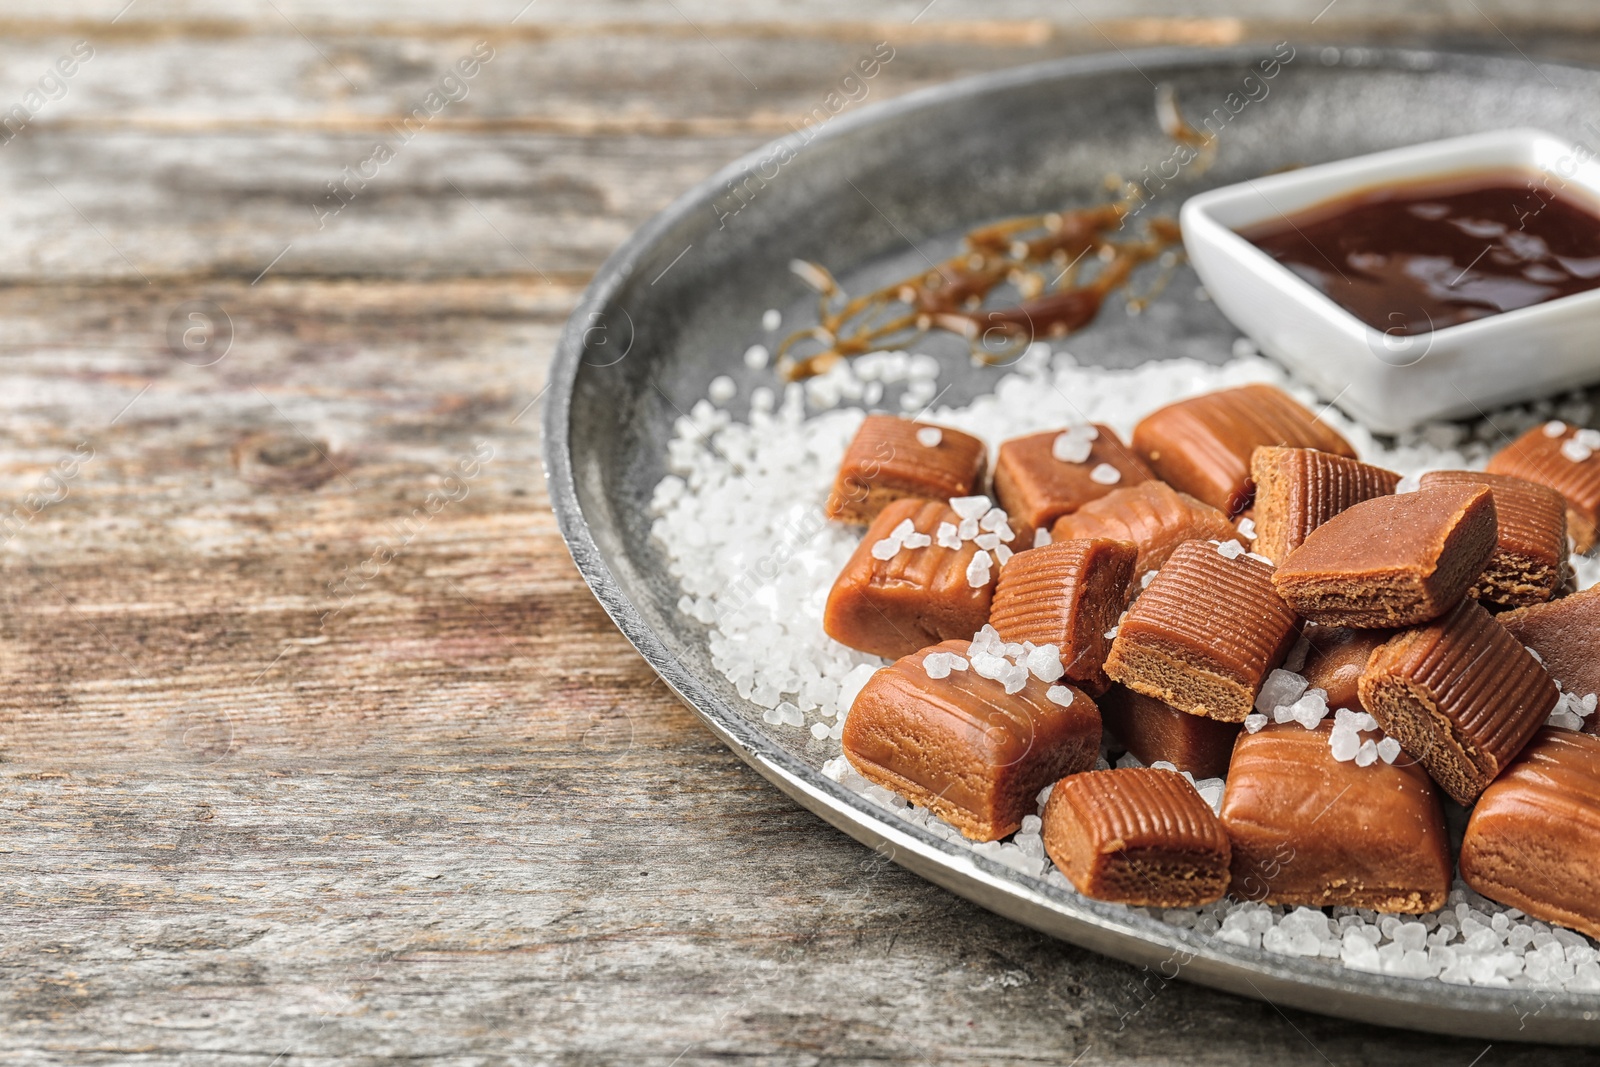 Photo of Plate with delicious caramel candies, sauce and salt on table